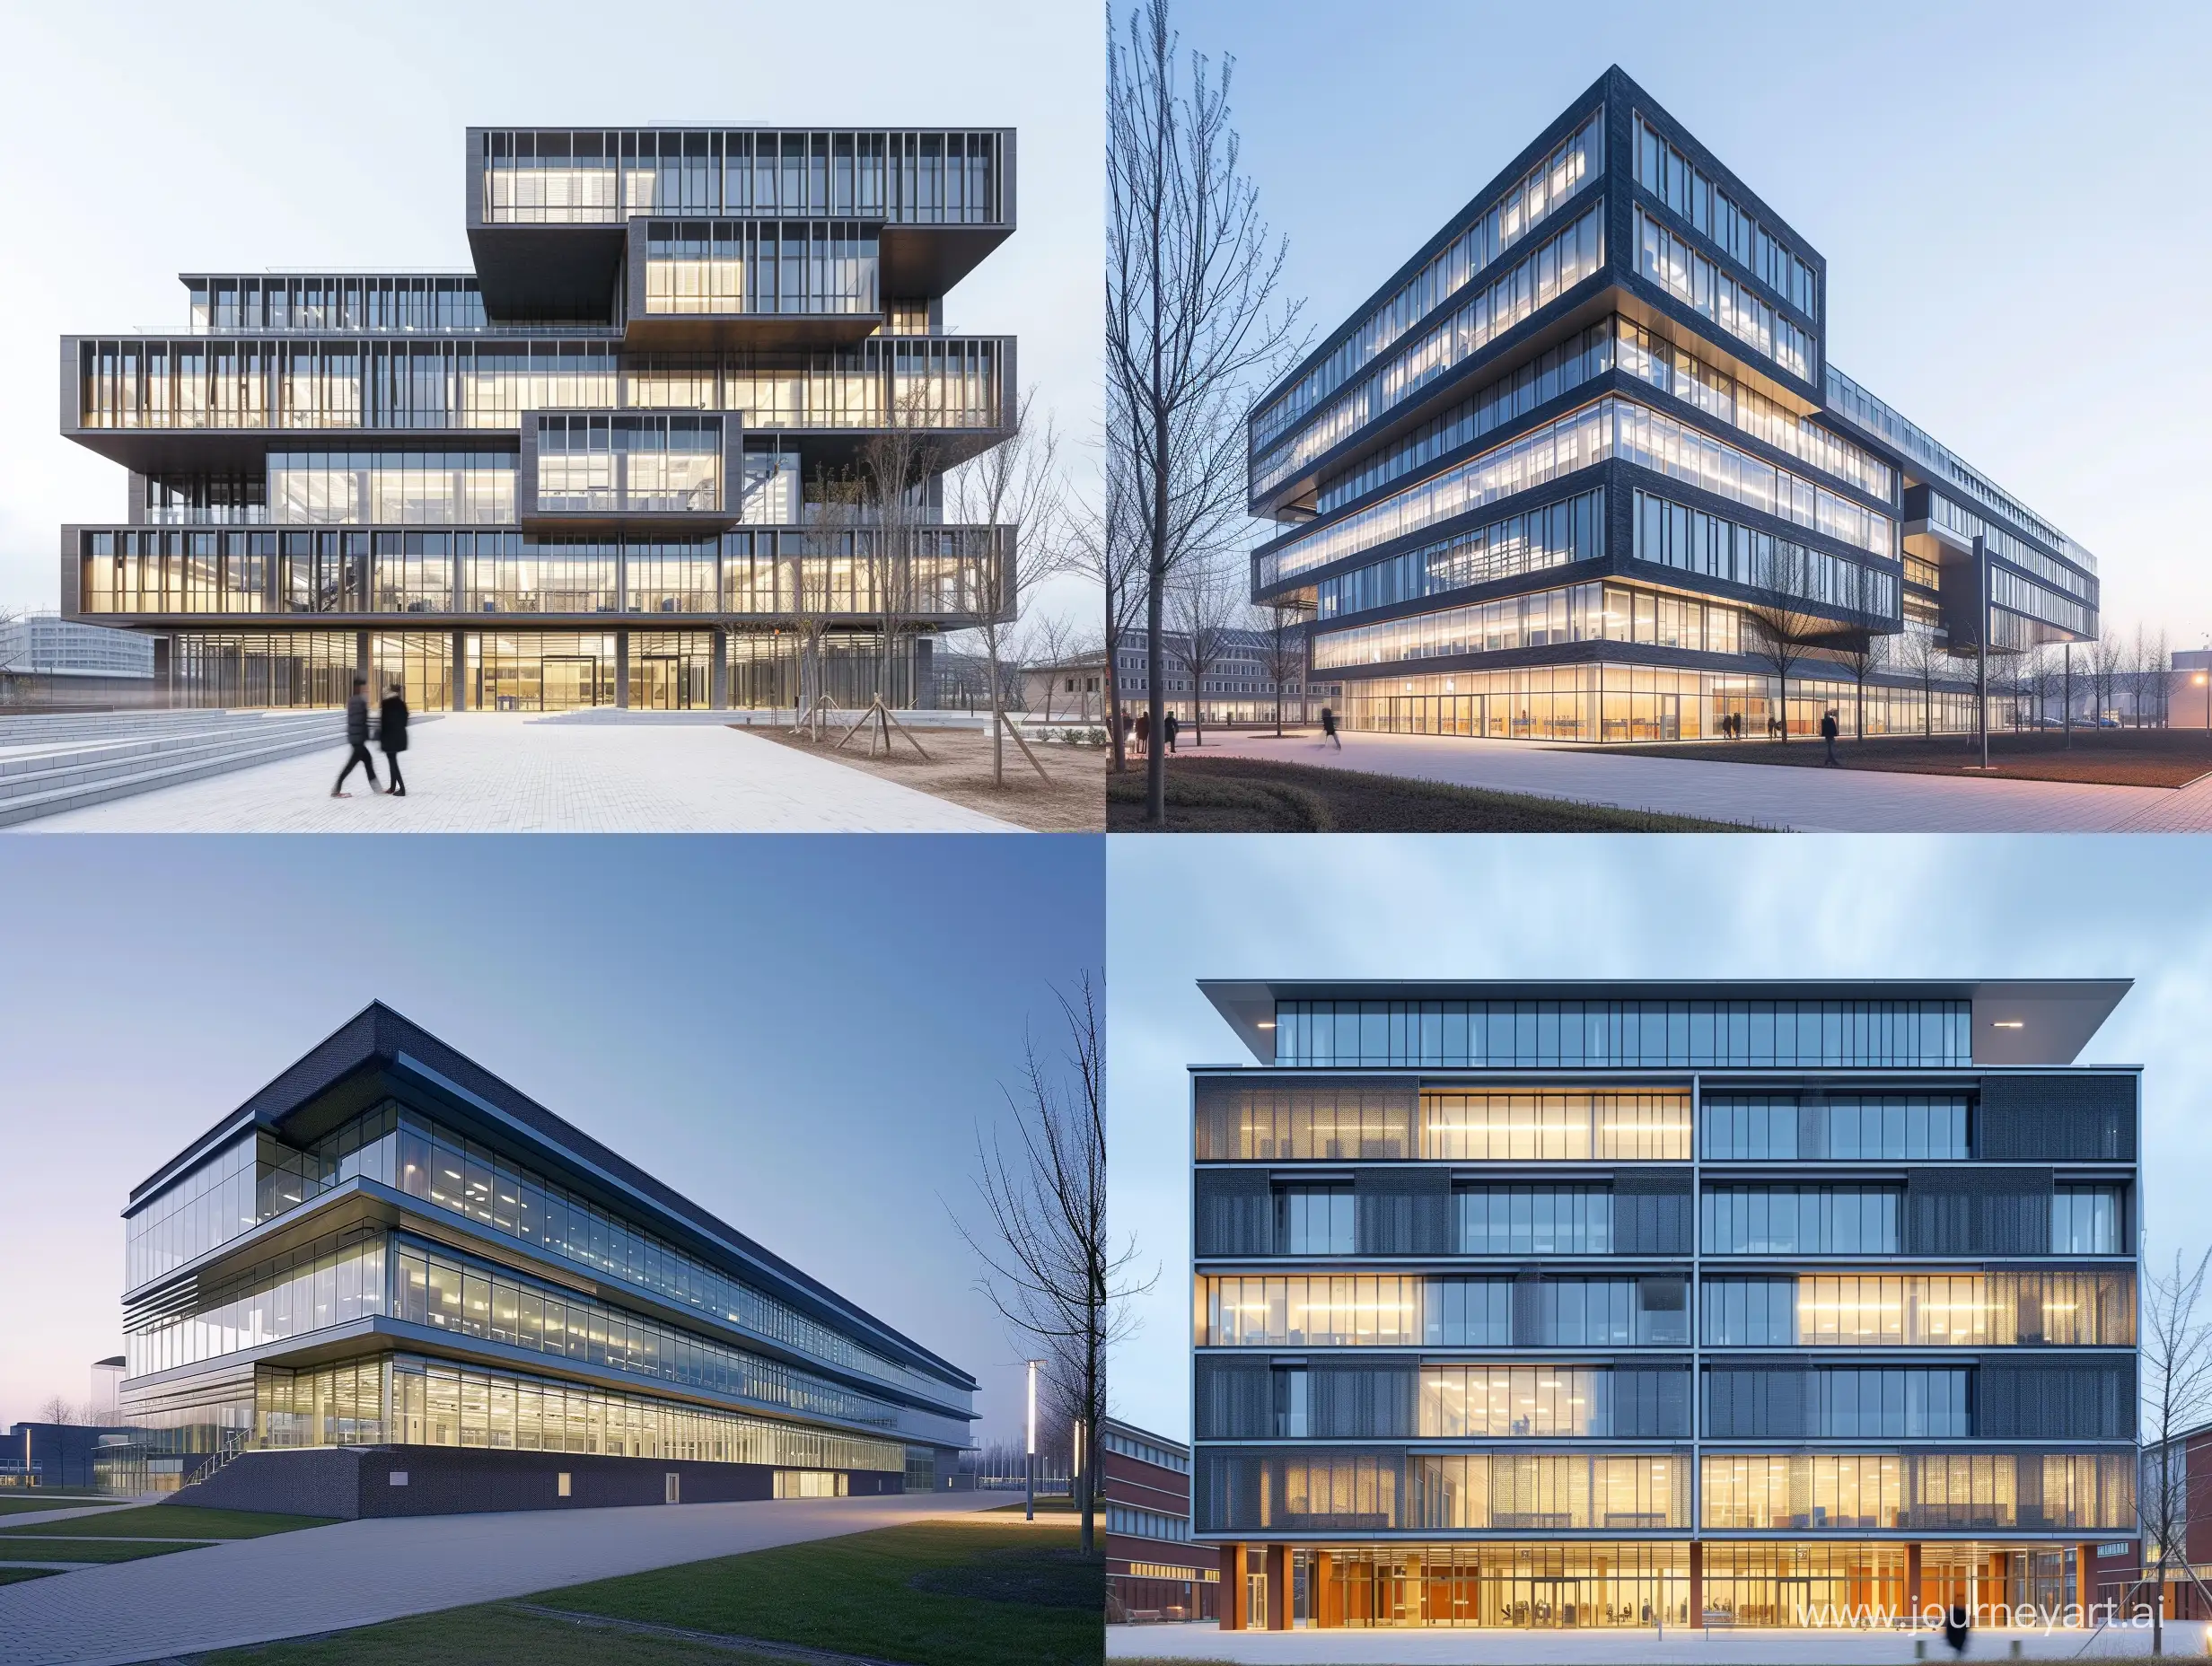 imagine a instutucional building contest architecture, 8 floors,exterior,perspective,Photographed by Iwan Baan,clean lines, open spaces, and the use of glass,steel, concrete,brick and steel.